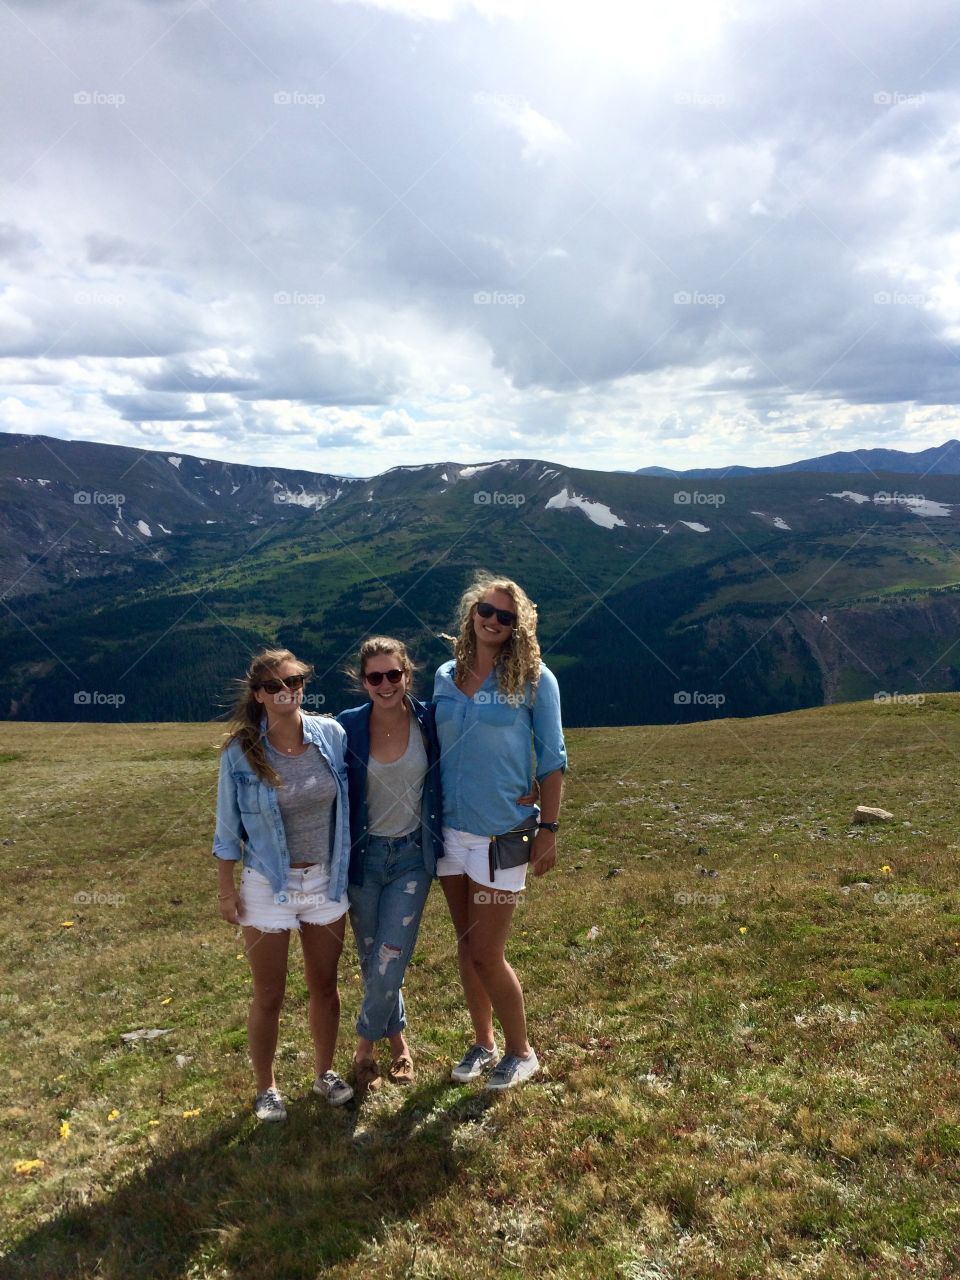 Girls in the mountains